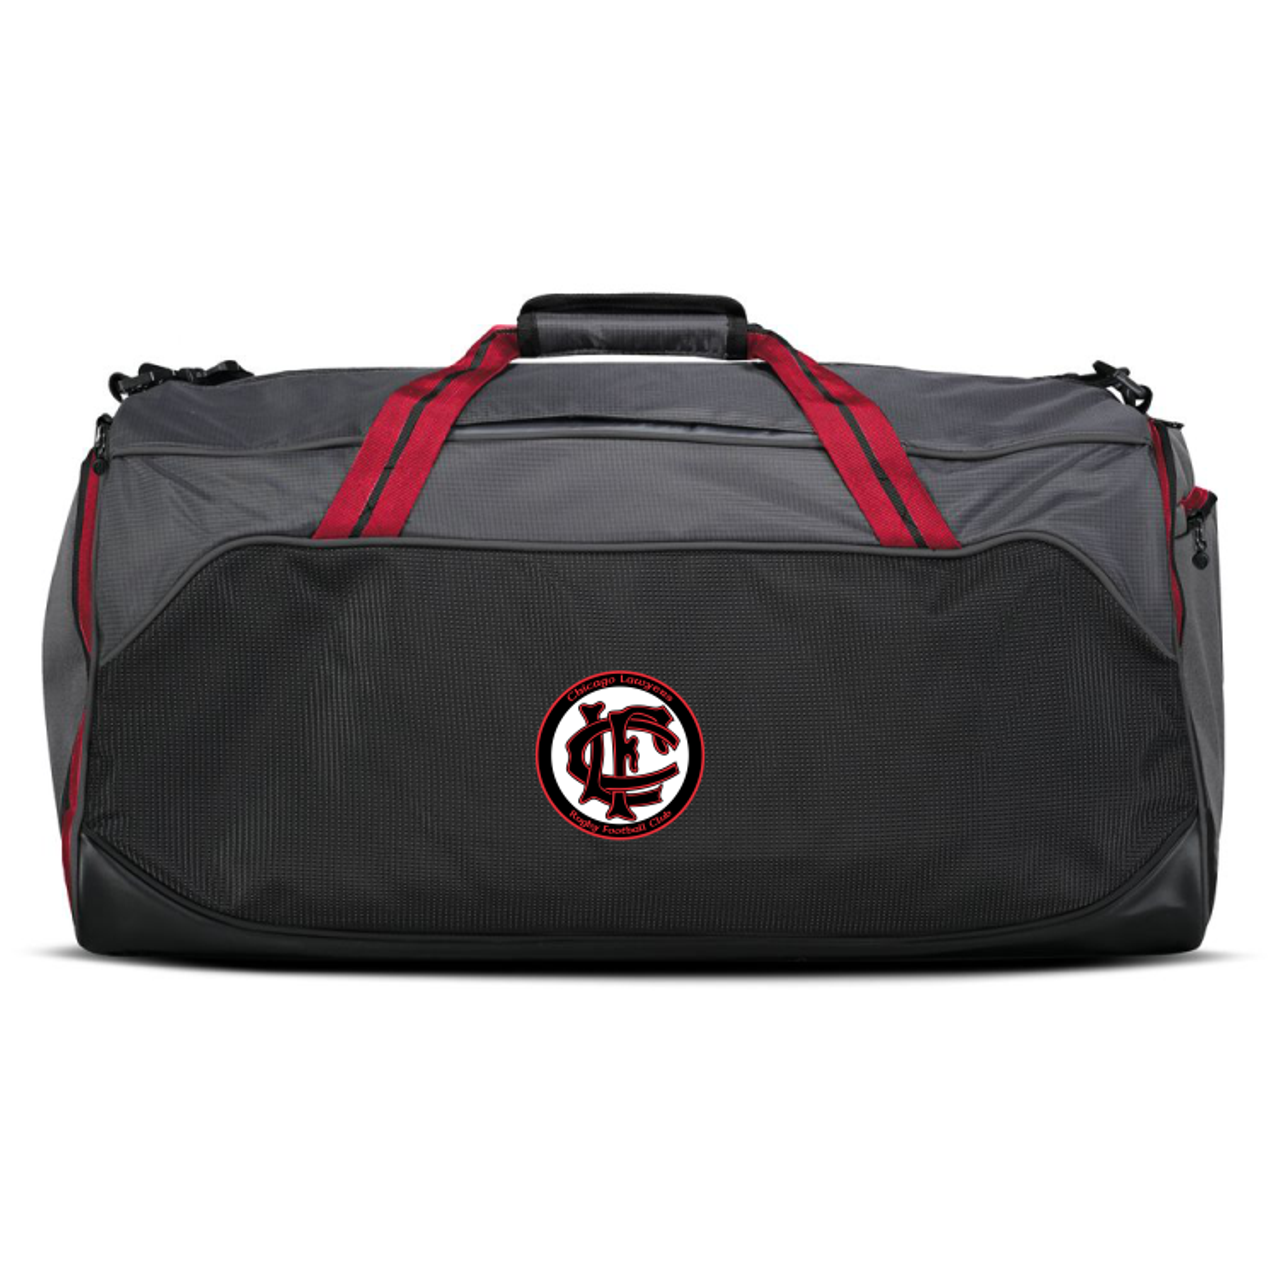 Chicago Lawyers Rugby Backpack Duffel